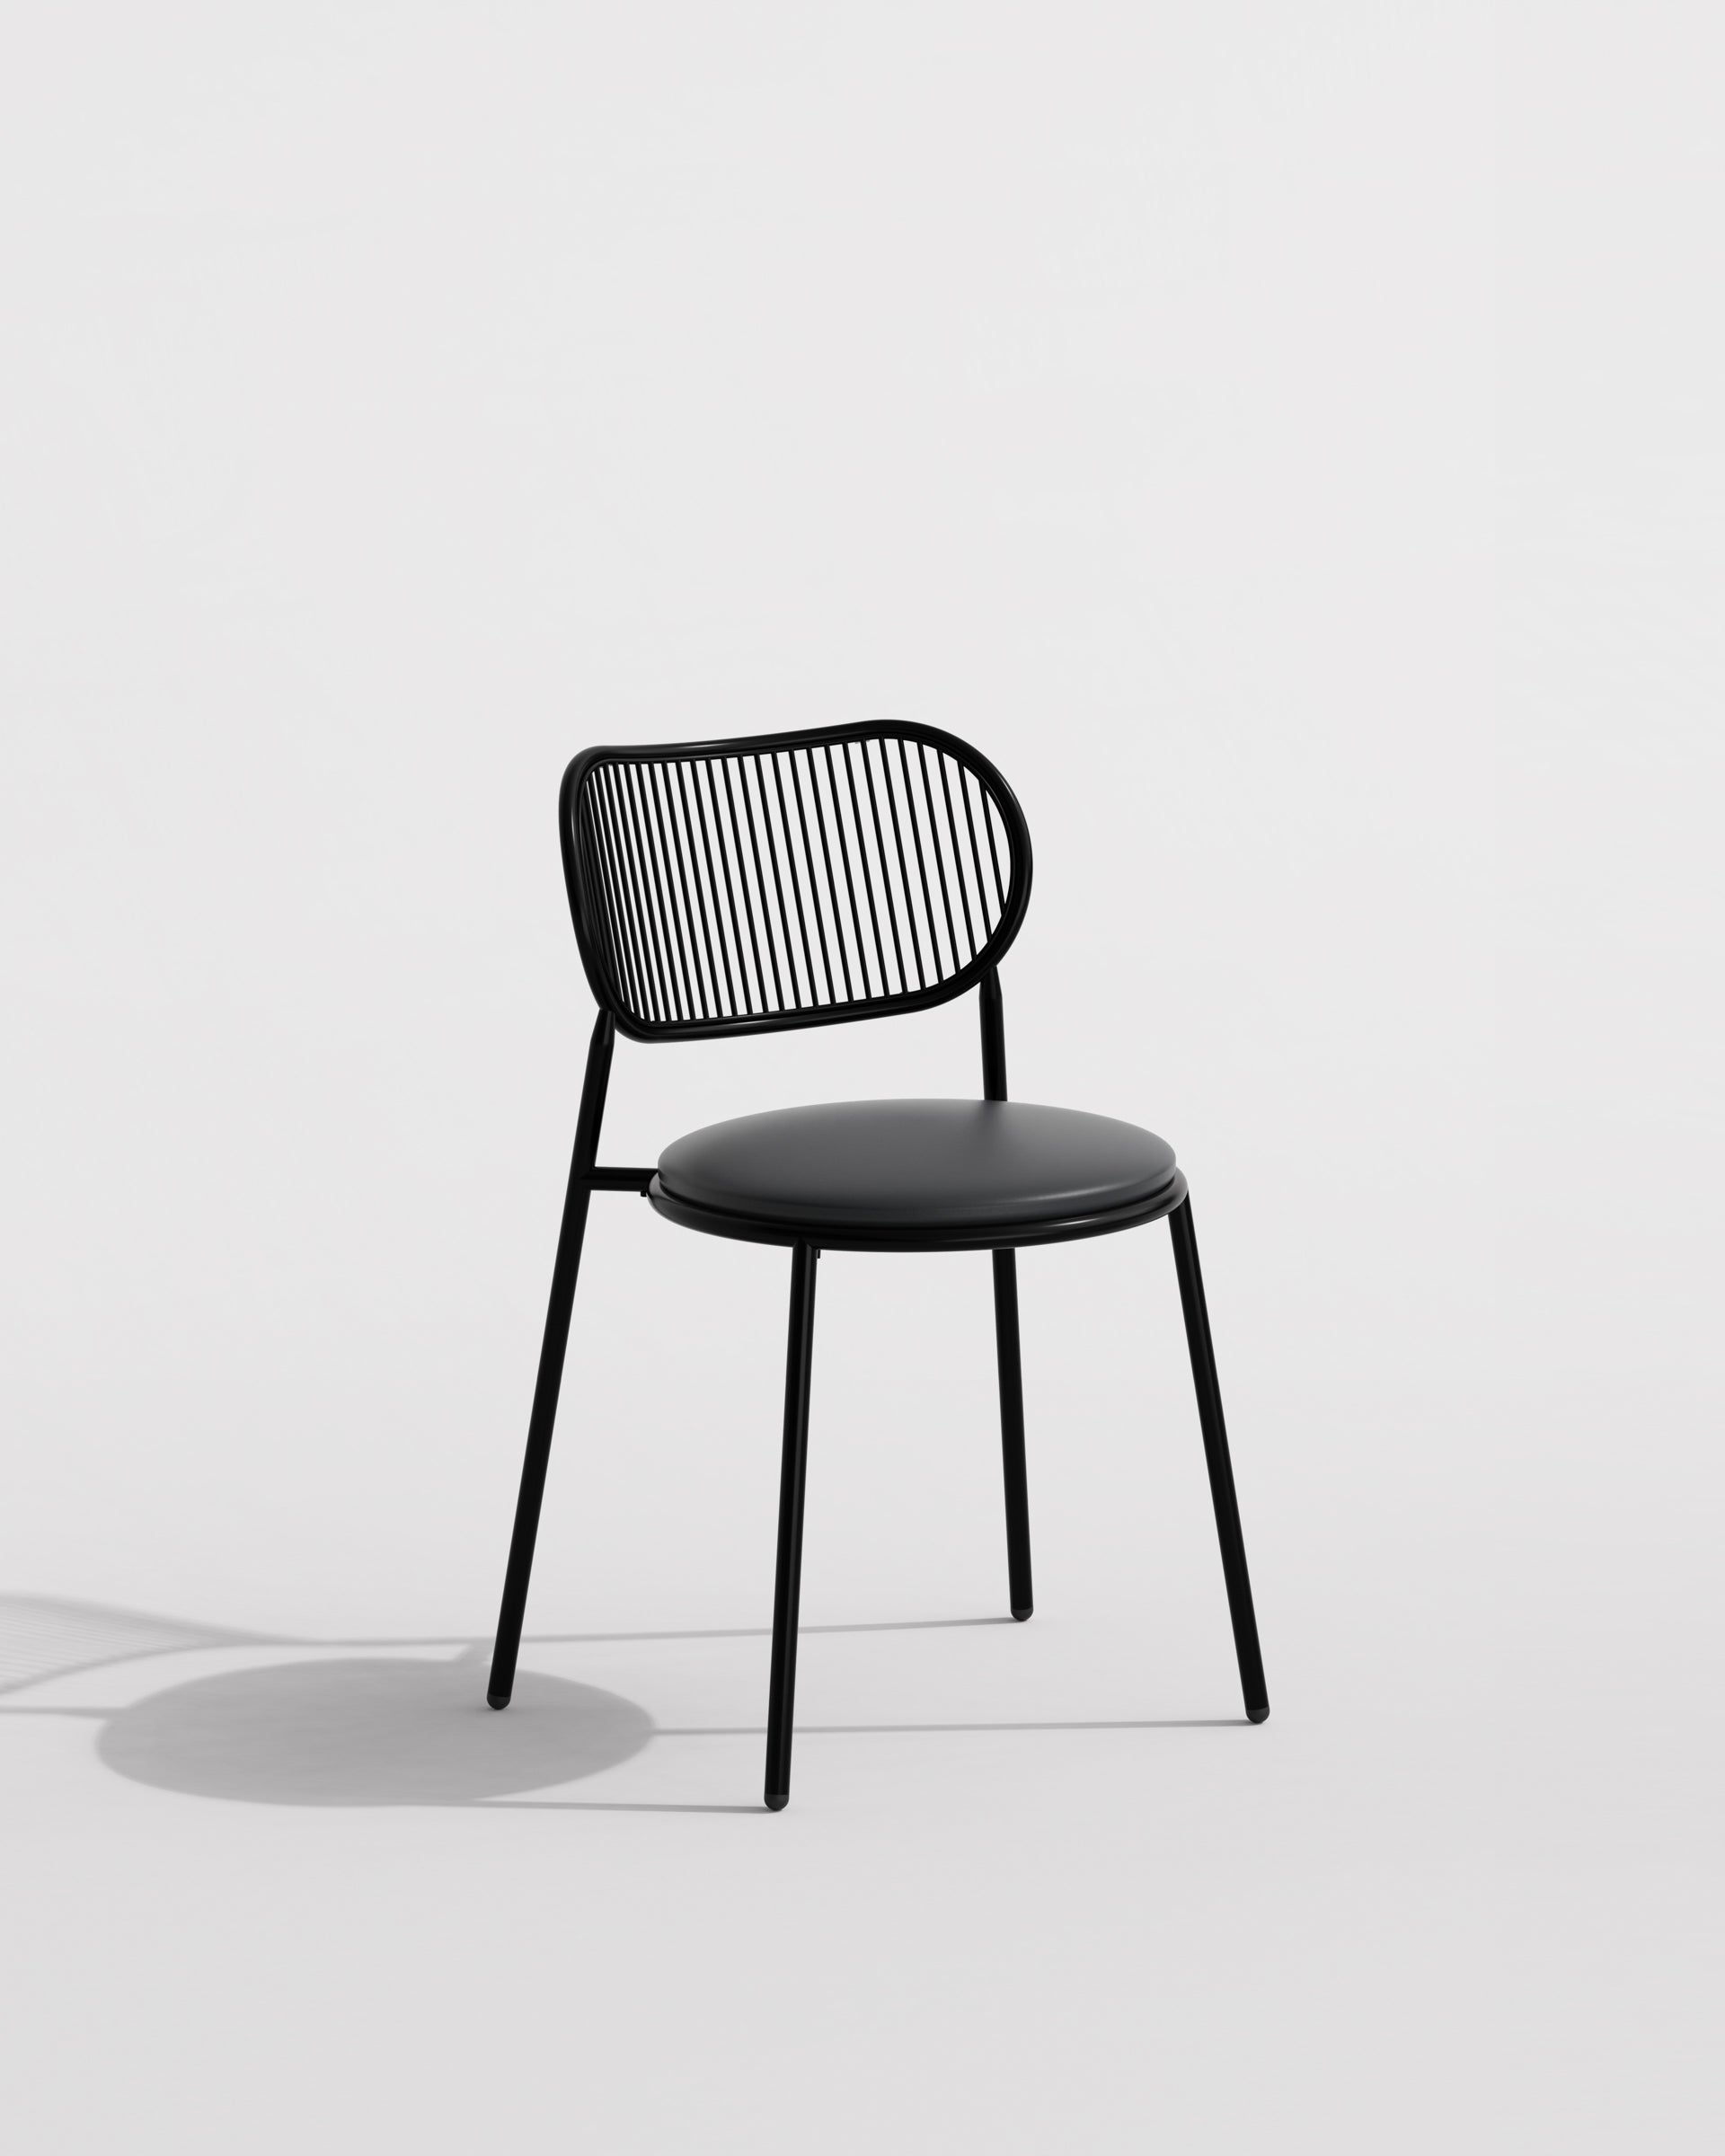 Piper Dining Chair Upholstered | Fabric or Leather Seat Stackable | Designed by GibsonKarlo | DesignByThem